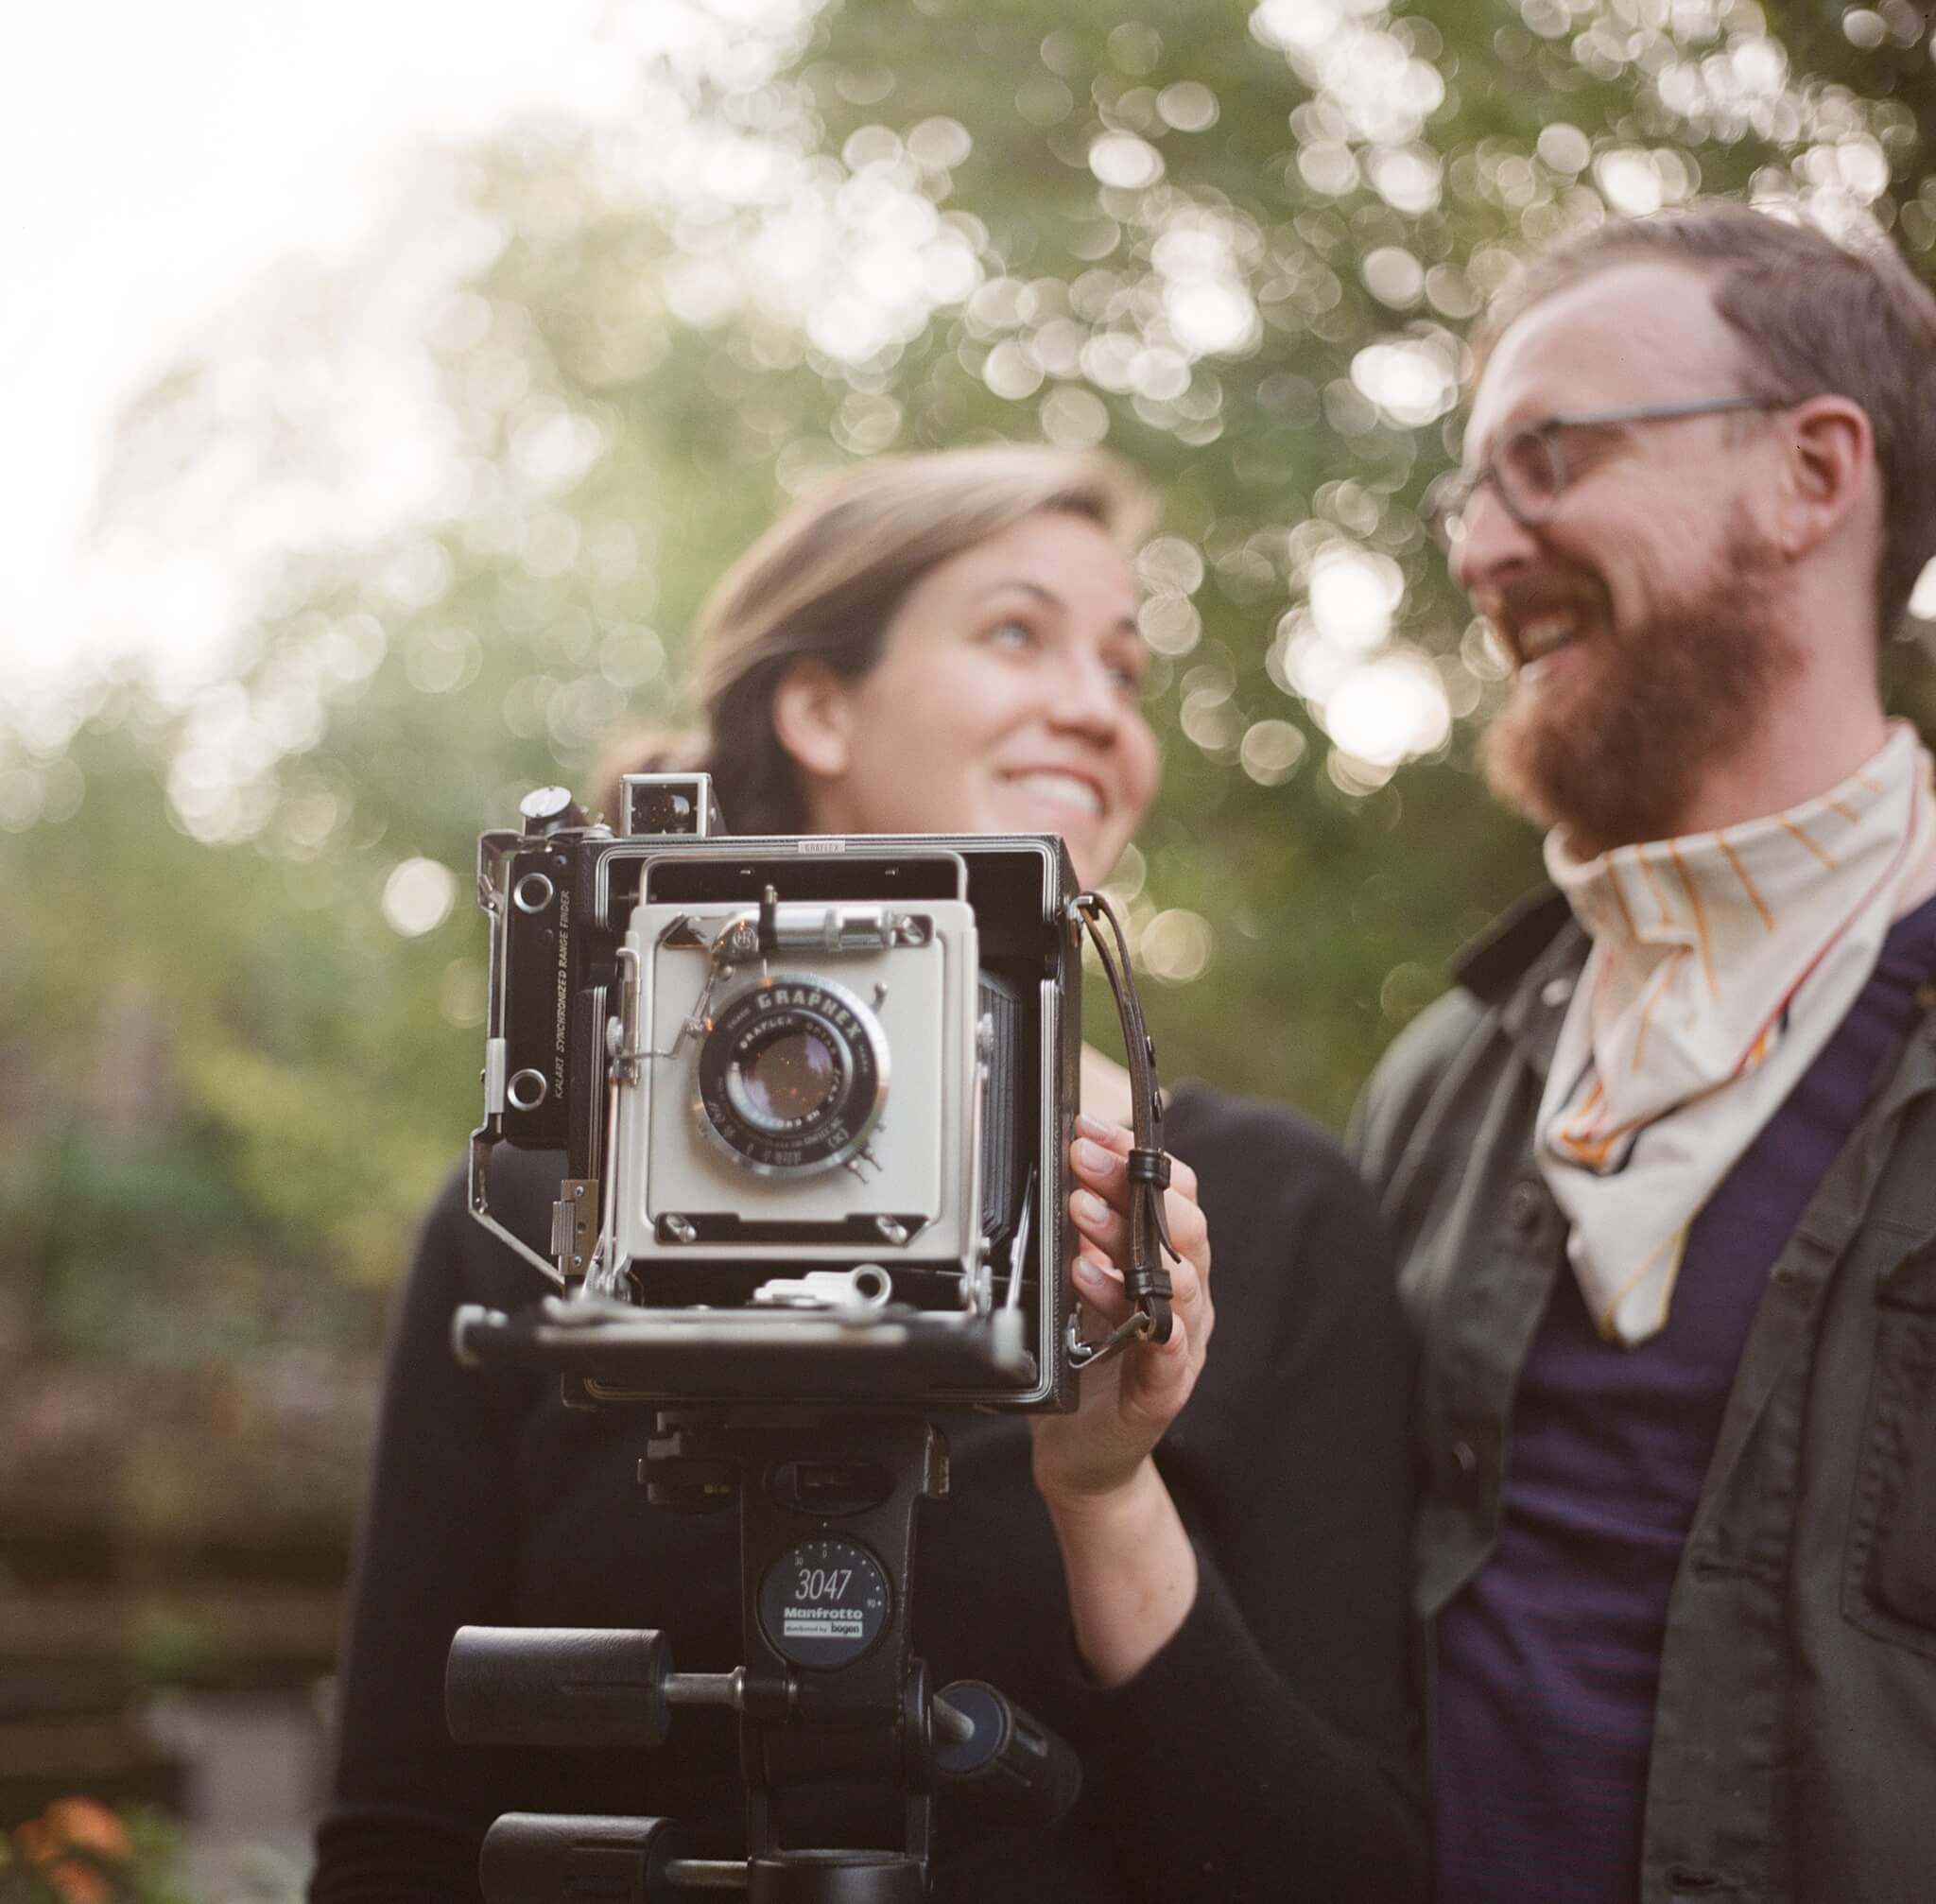 hasselblad 500 cm review and sample image on portra 160. A couple laughs and smiles at each other behind a Speed Graphic 4x5 camera.